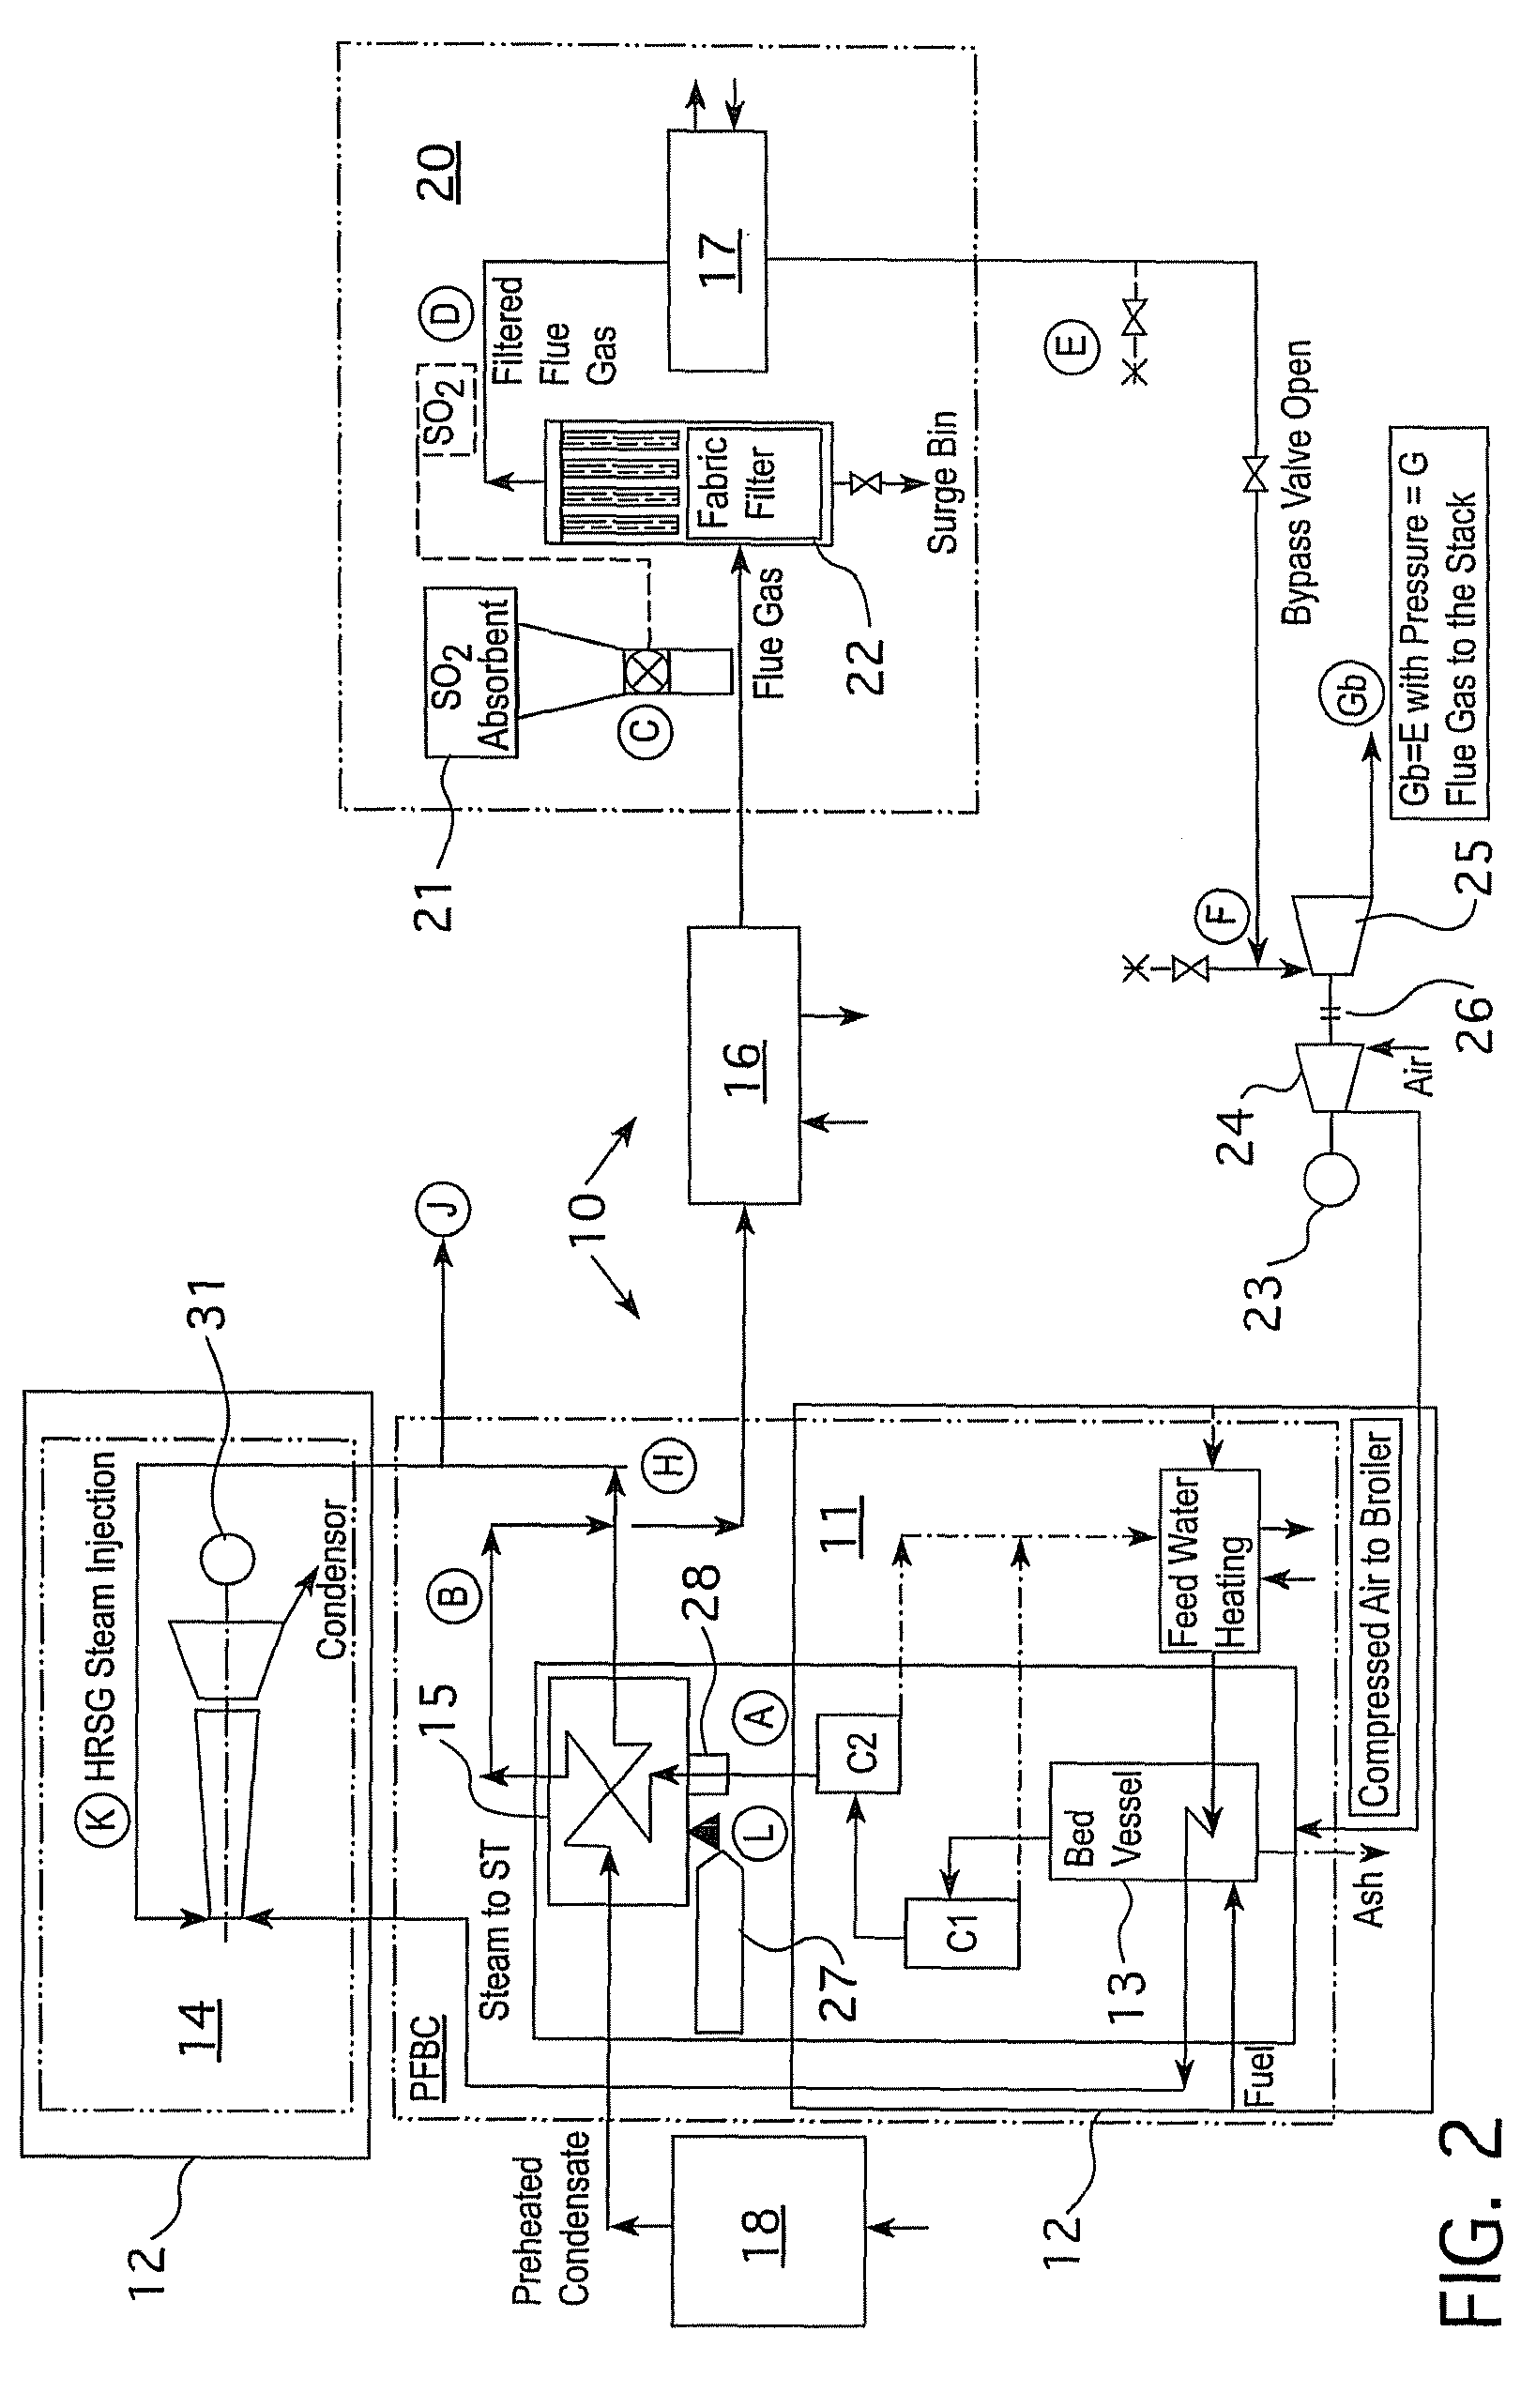 Carbon Dioxide Capture Interface and Power Generation Facility